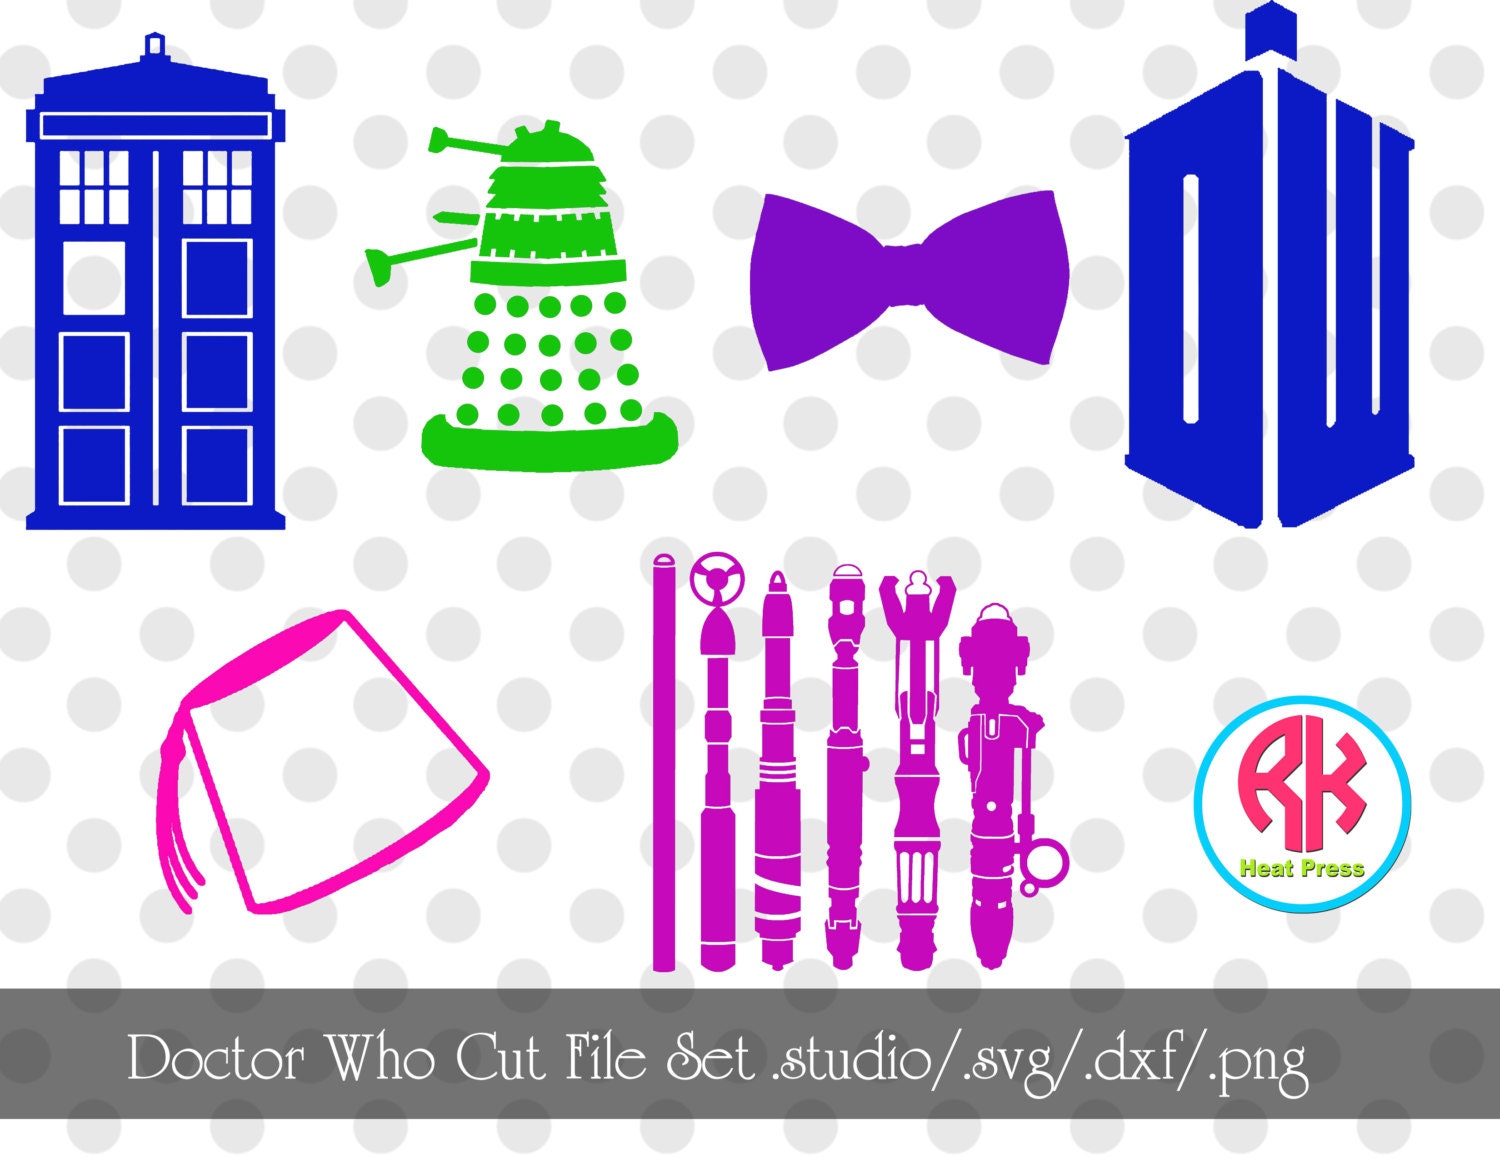 Download Doctor Who Silhouette Cut File Set .png .dxf .svg